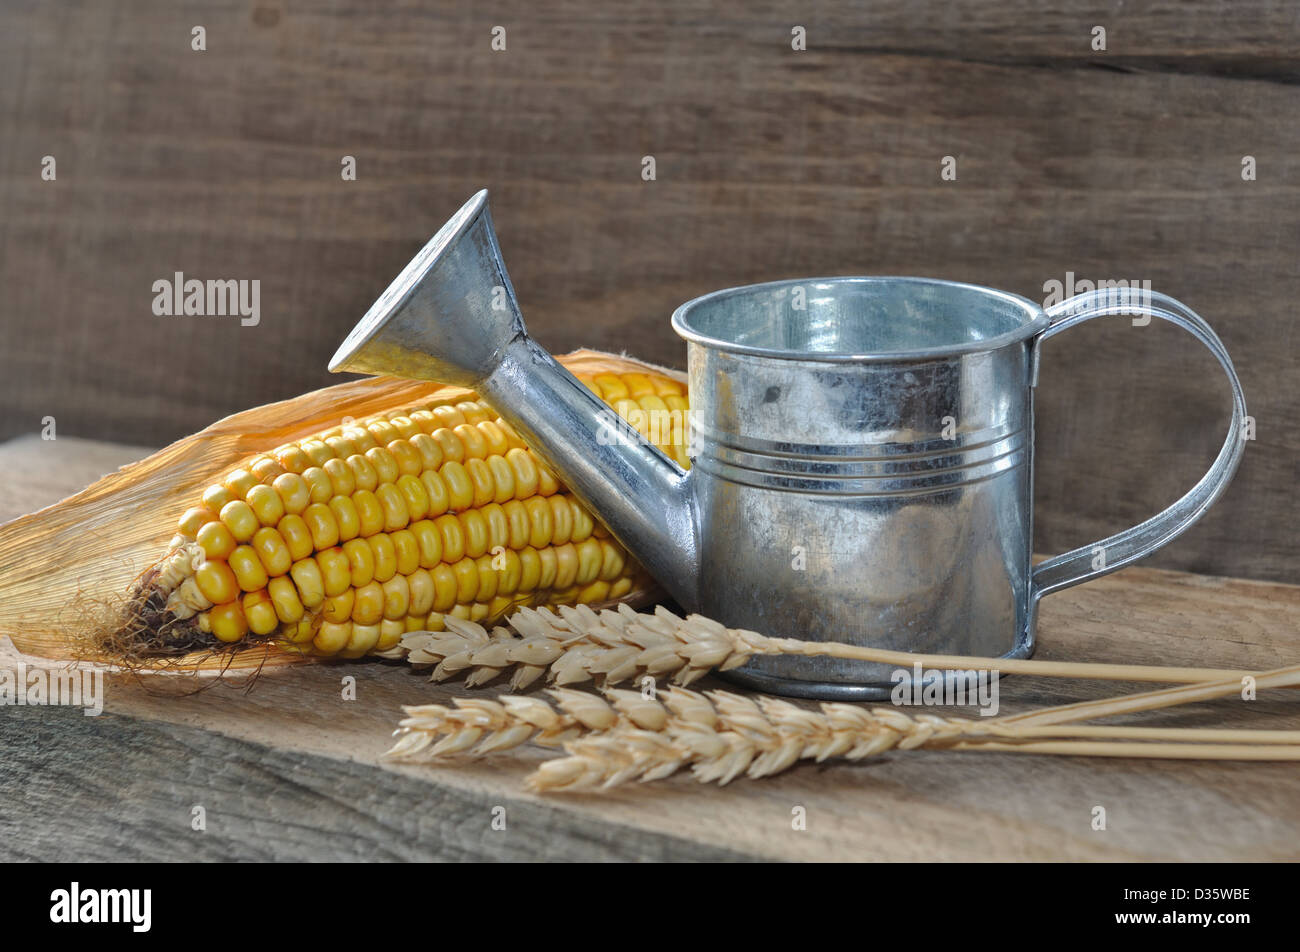 a little watering can in a rustic setting with corn and wheat, on wooden background Stock Photo